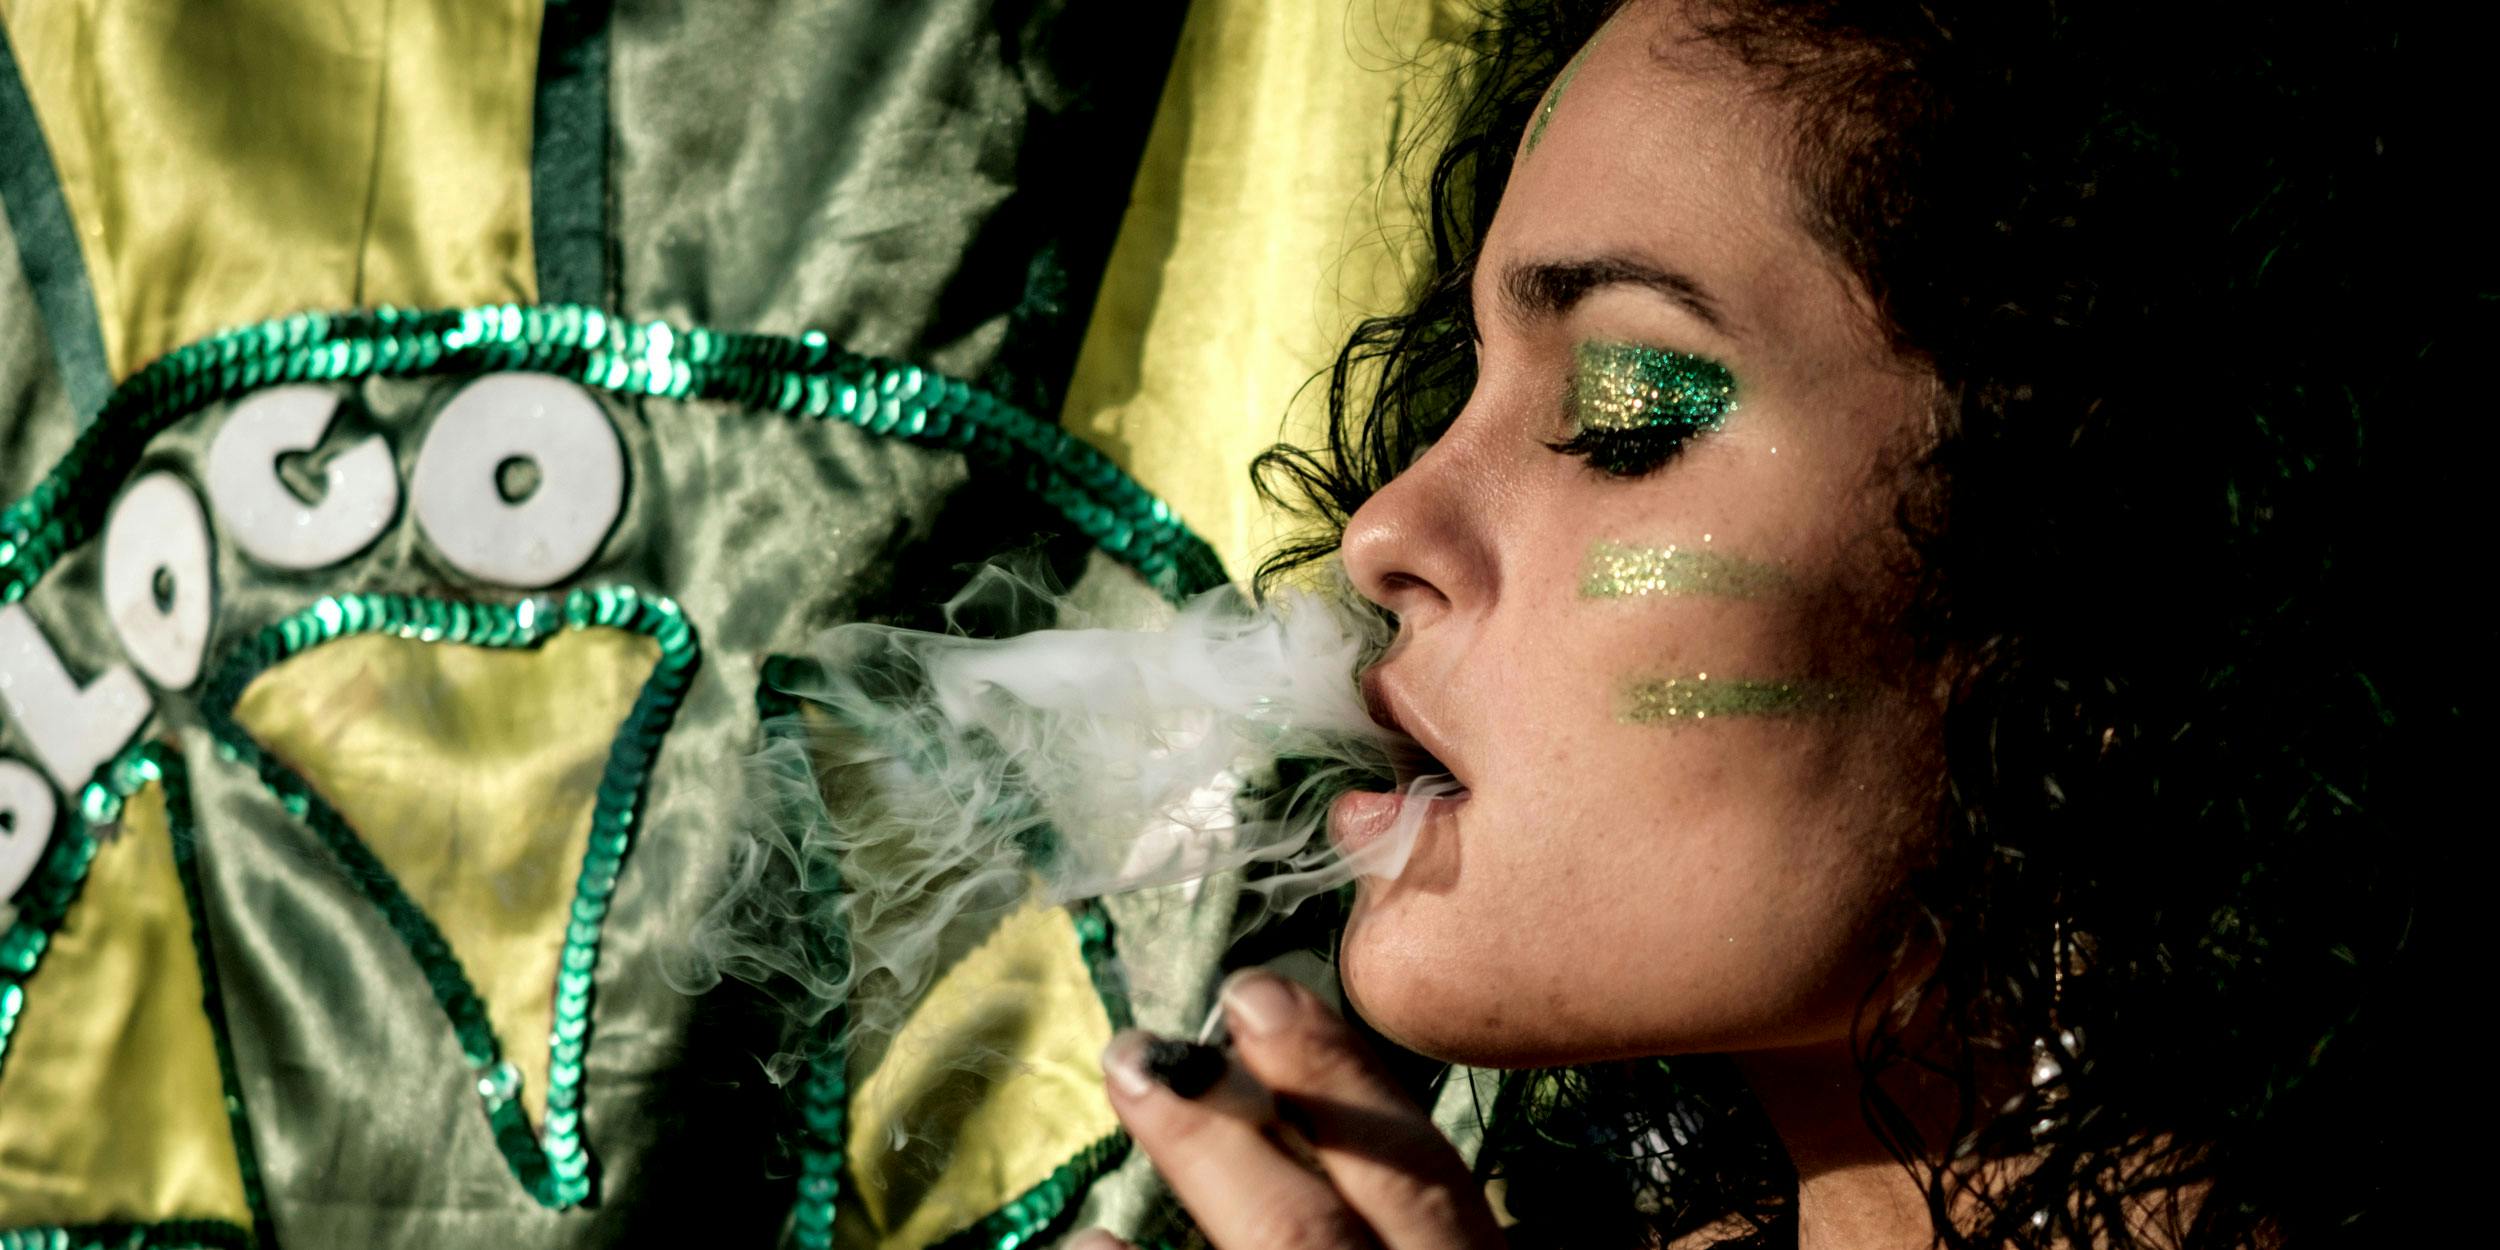 A woman smokes a joint during a march calling for the legalization of marijuana along Ipanema beach in Rio de Janeiro, Brazil on May 6, 2017. Weed slang for a joint in Brazil is a beck, in case you’re looking for a single-serve in the country.